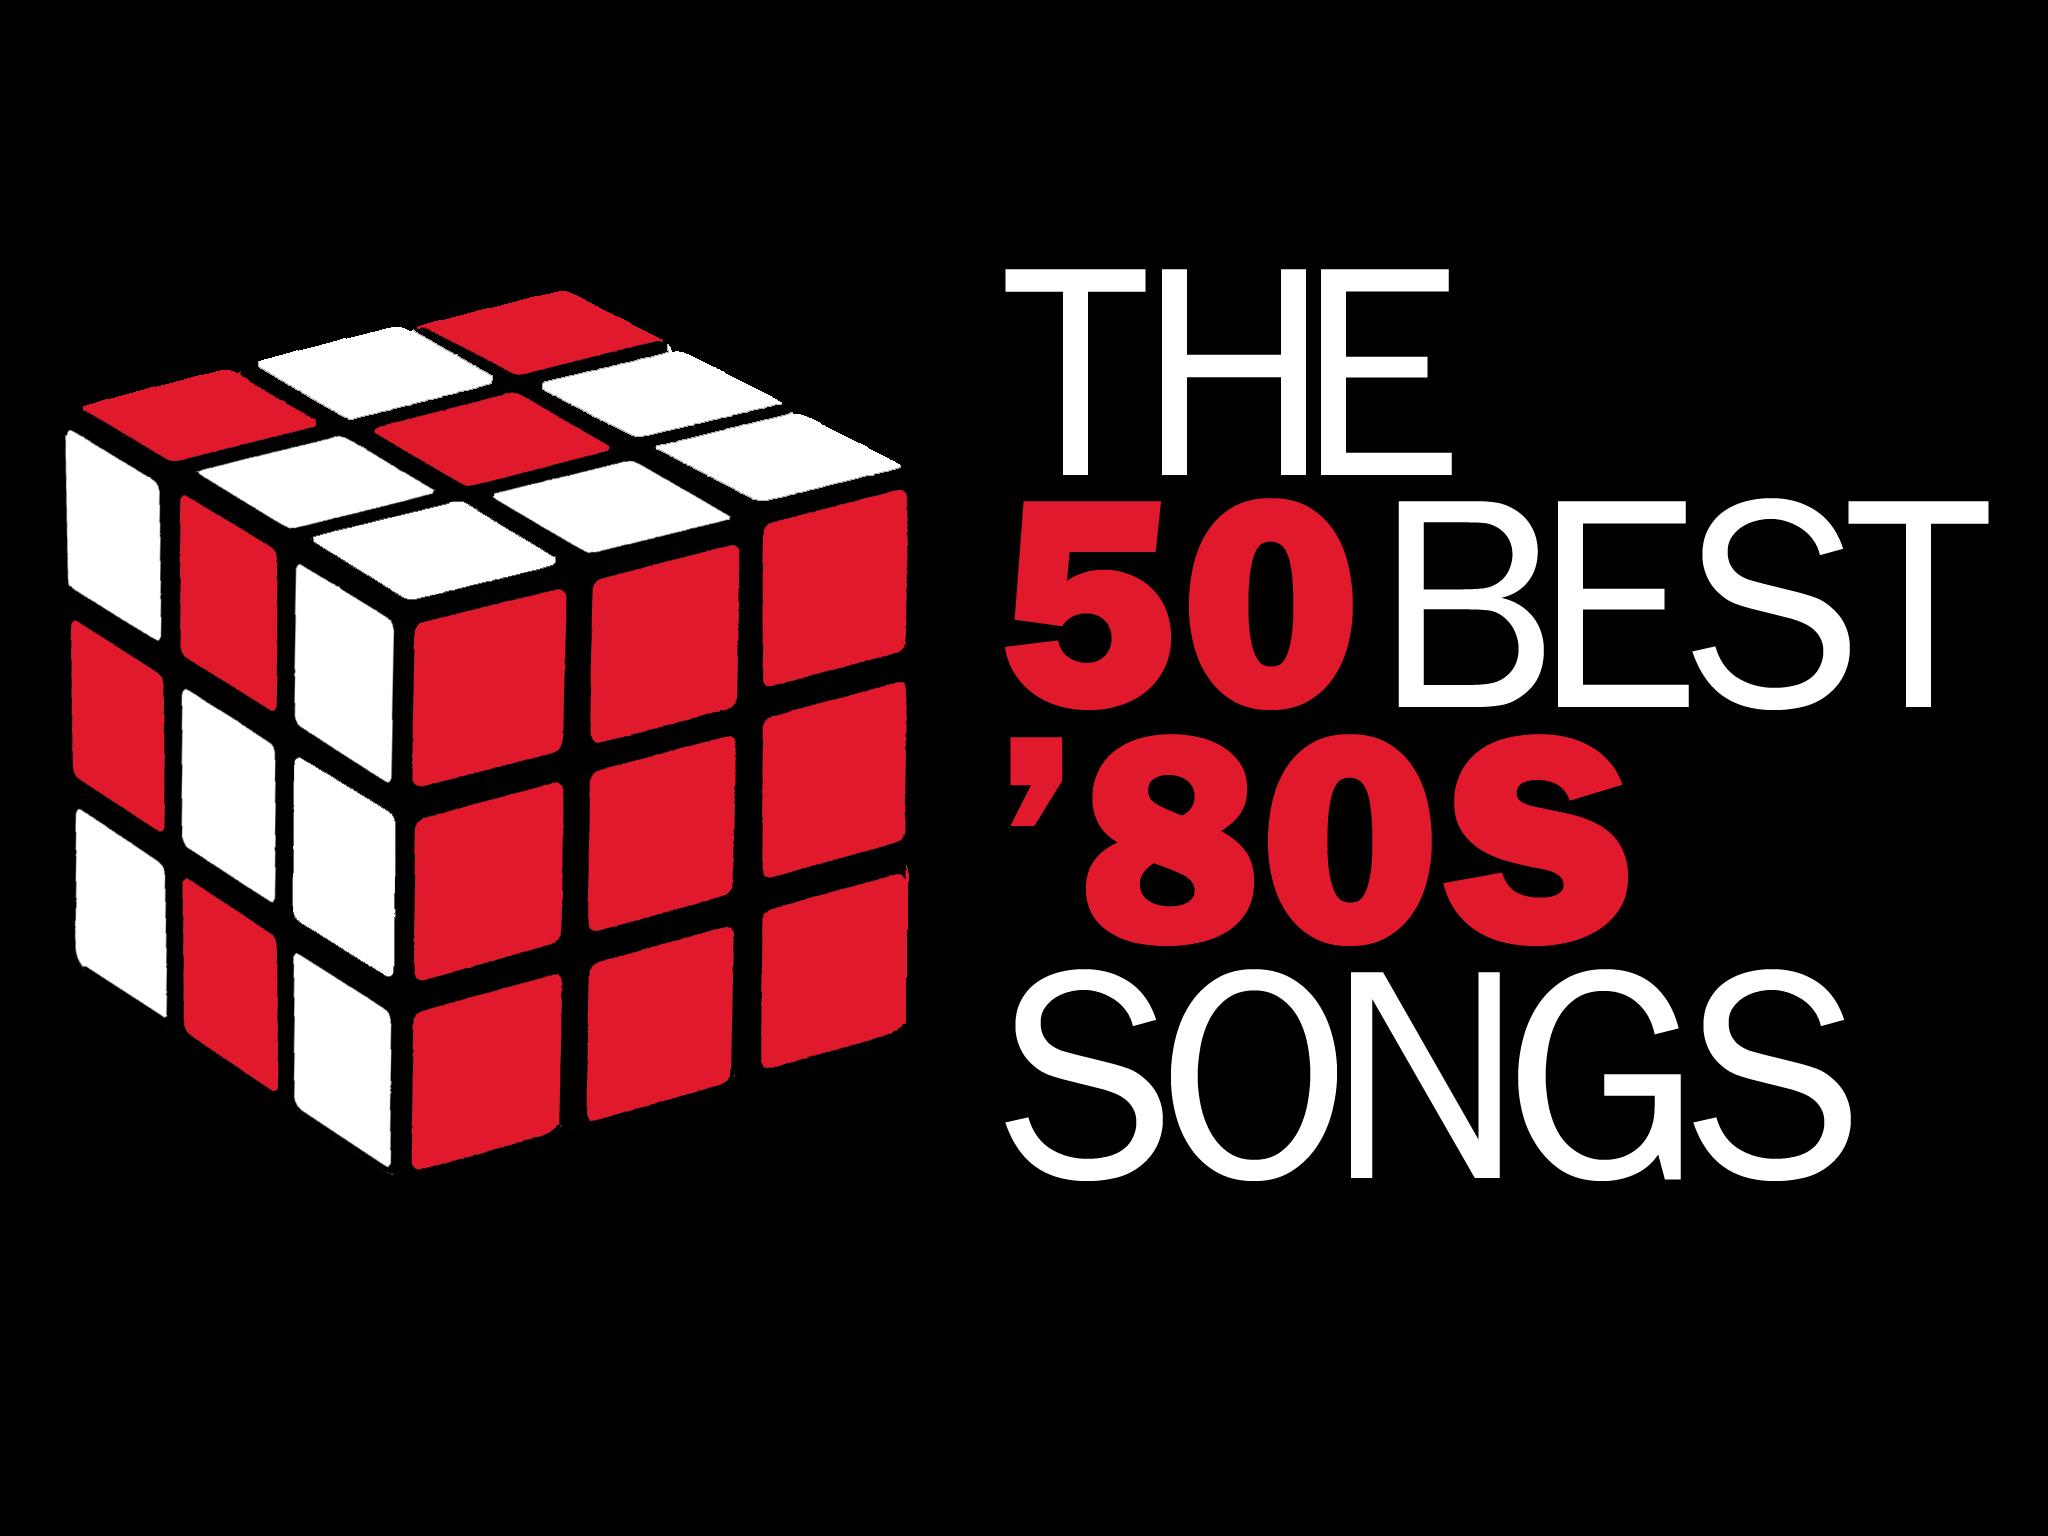 The 50 best '80s songs